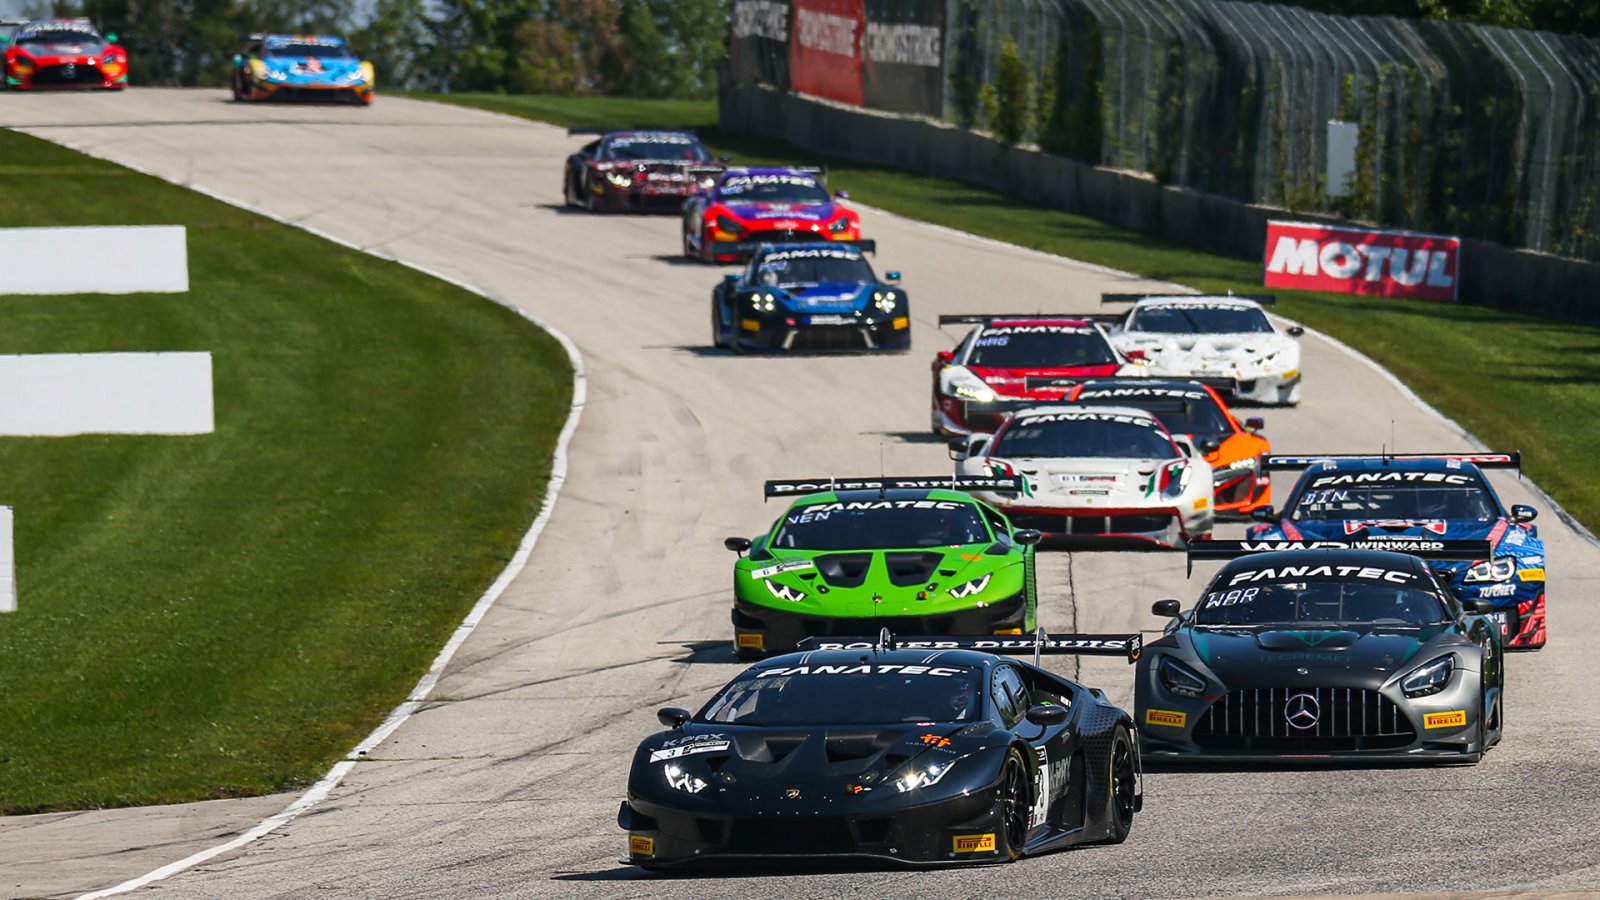 Lamborghini Takes Overall Win, Racers Edge Breaks Through to Win First Pro-Am